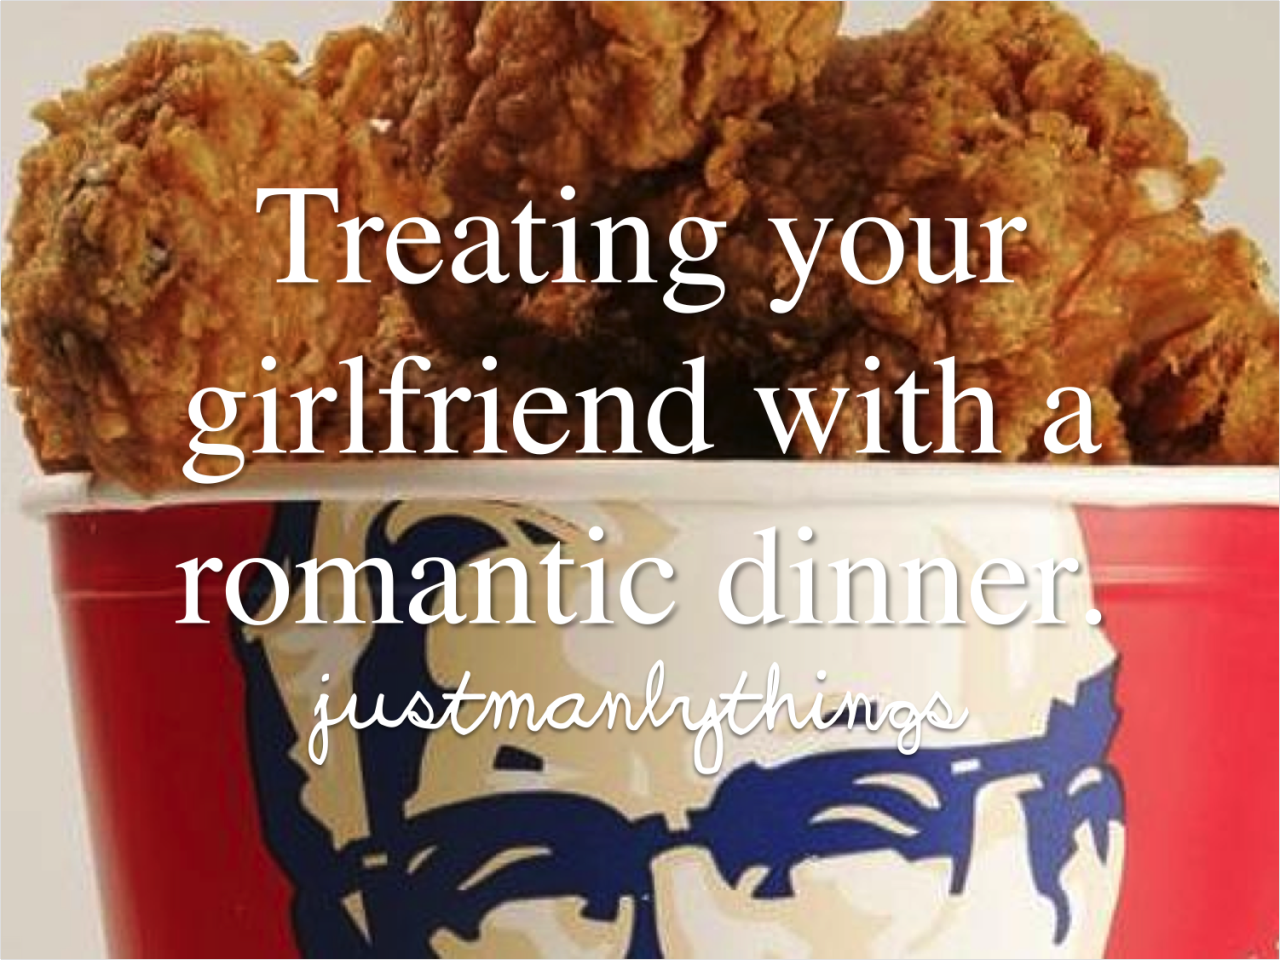 kfc fried chicken bucket - Treating your girlfriend with a romantic dinner justmanbrything